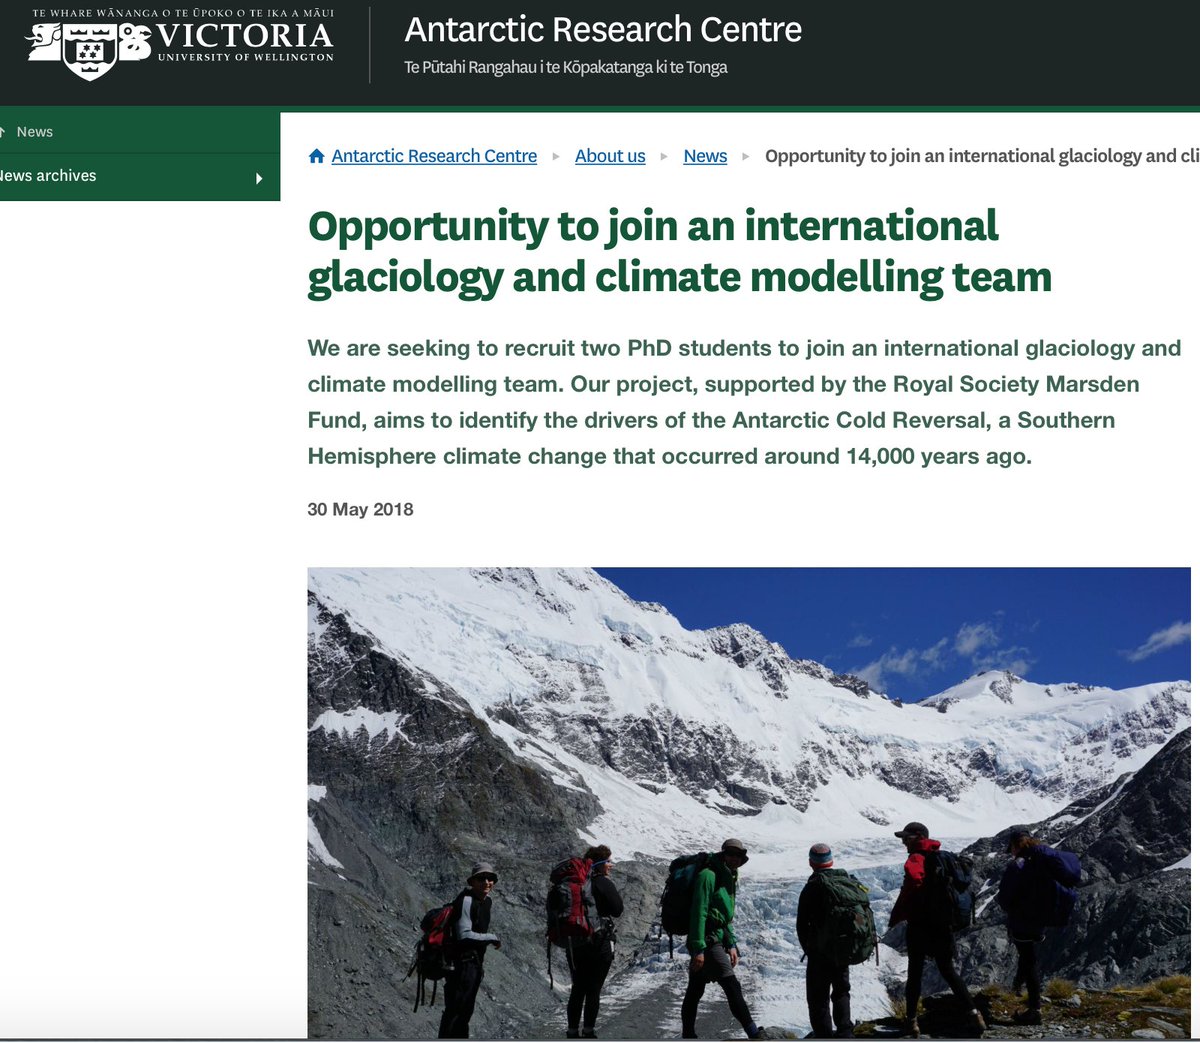 Please RT. Two PhD positions in #glaciology/climate modelling and glacial geology/10Be dating, in Wellington New Zealand. One week until we start reviewing applications. Come join our team! victoria.ac.nz/antarctic/abou… #phdlife #PhDstudentship